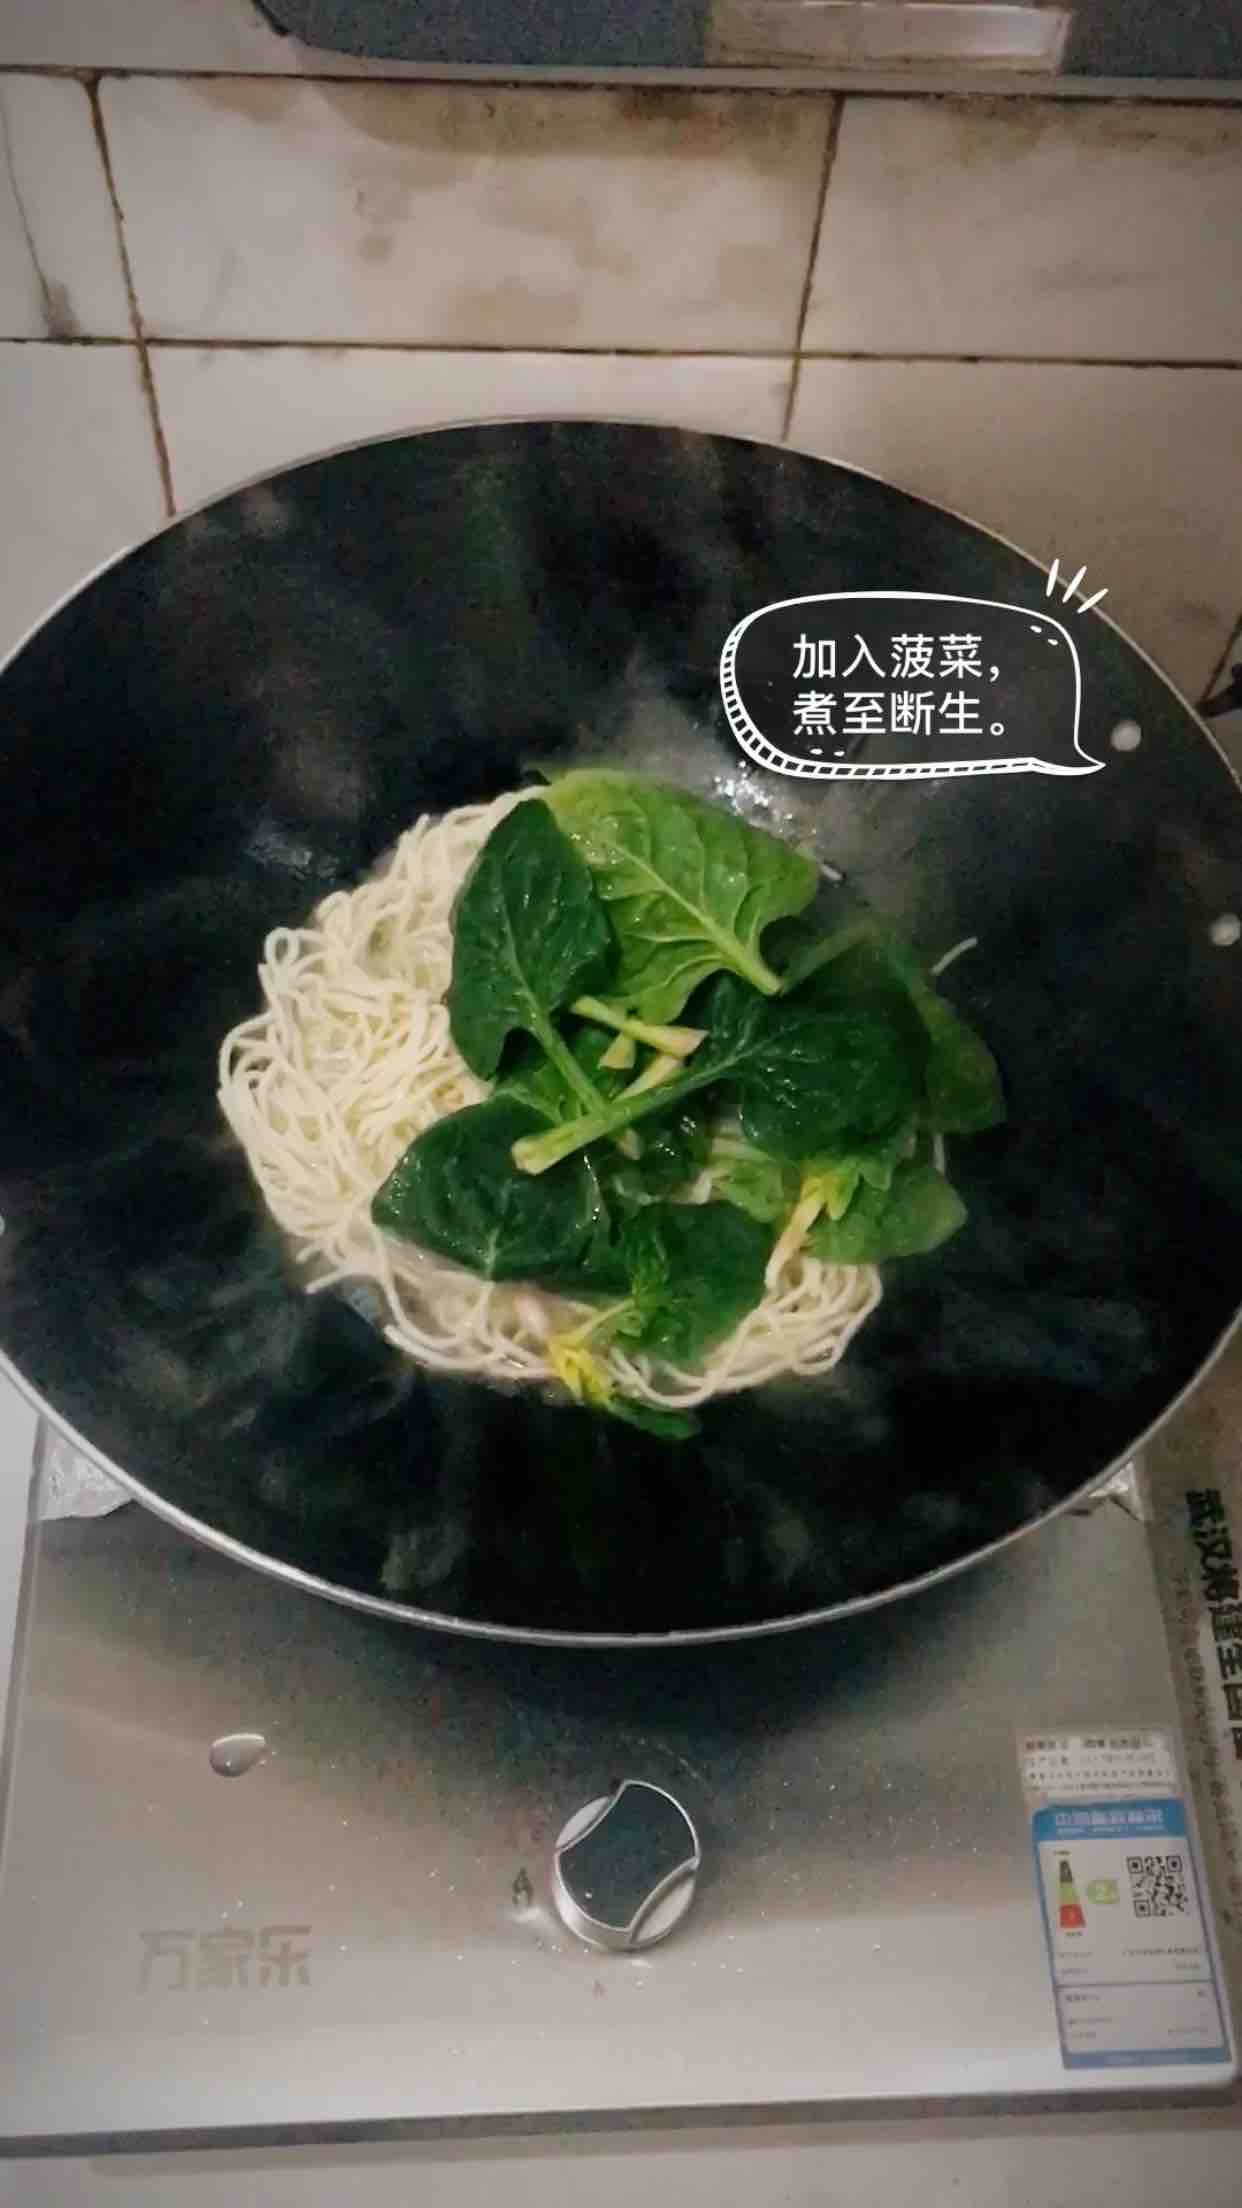 Spinach Sausage Water Cut Noodles recipe